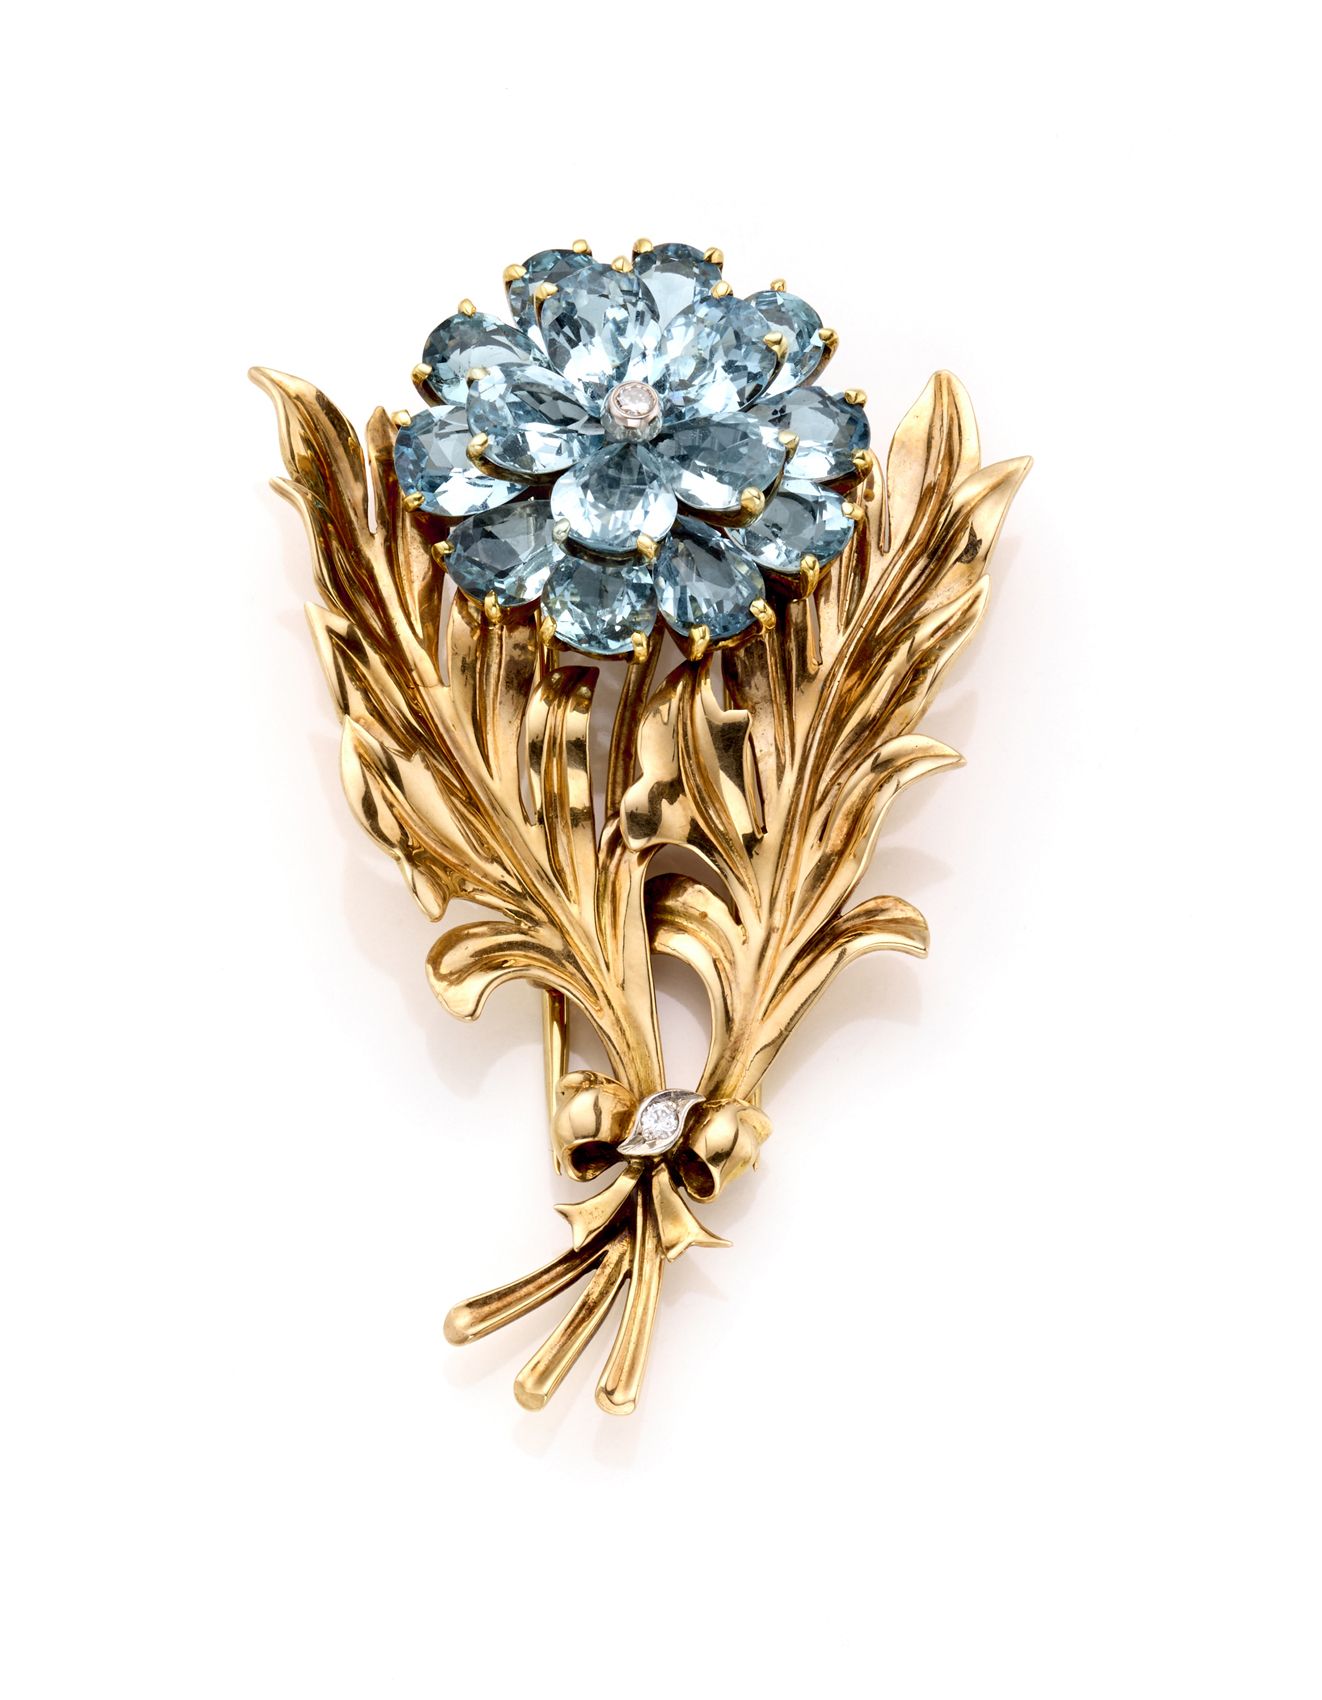 Null TIFFANY & CO.
Yellow 14K gold pear shaped aquamarine floral shaped brooch a&hellip;